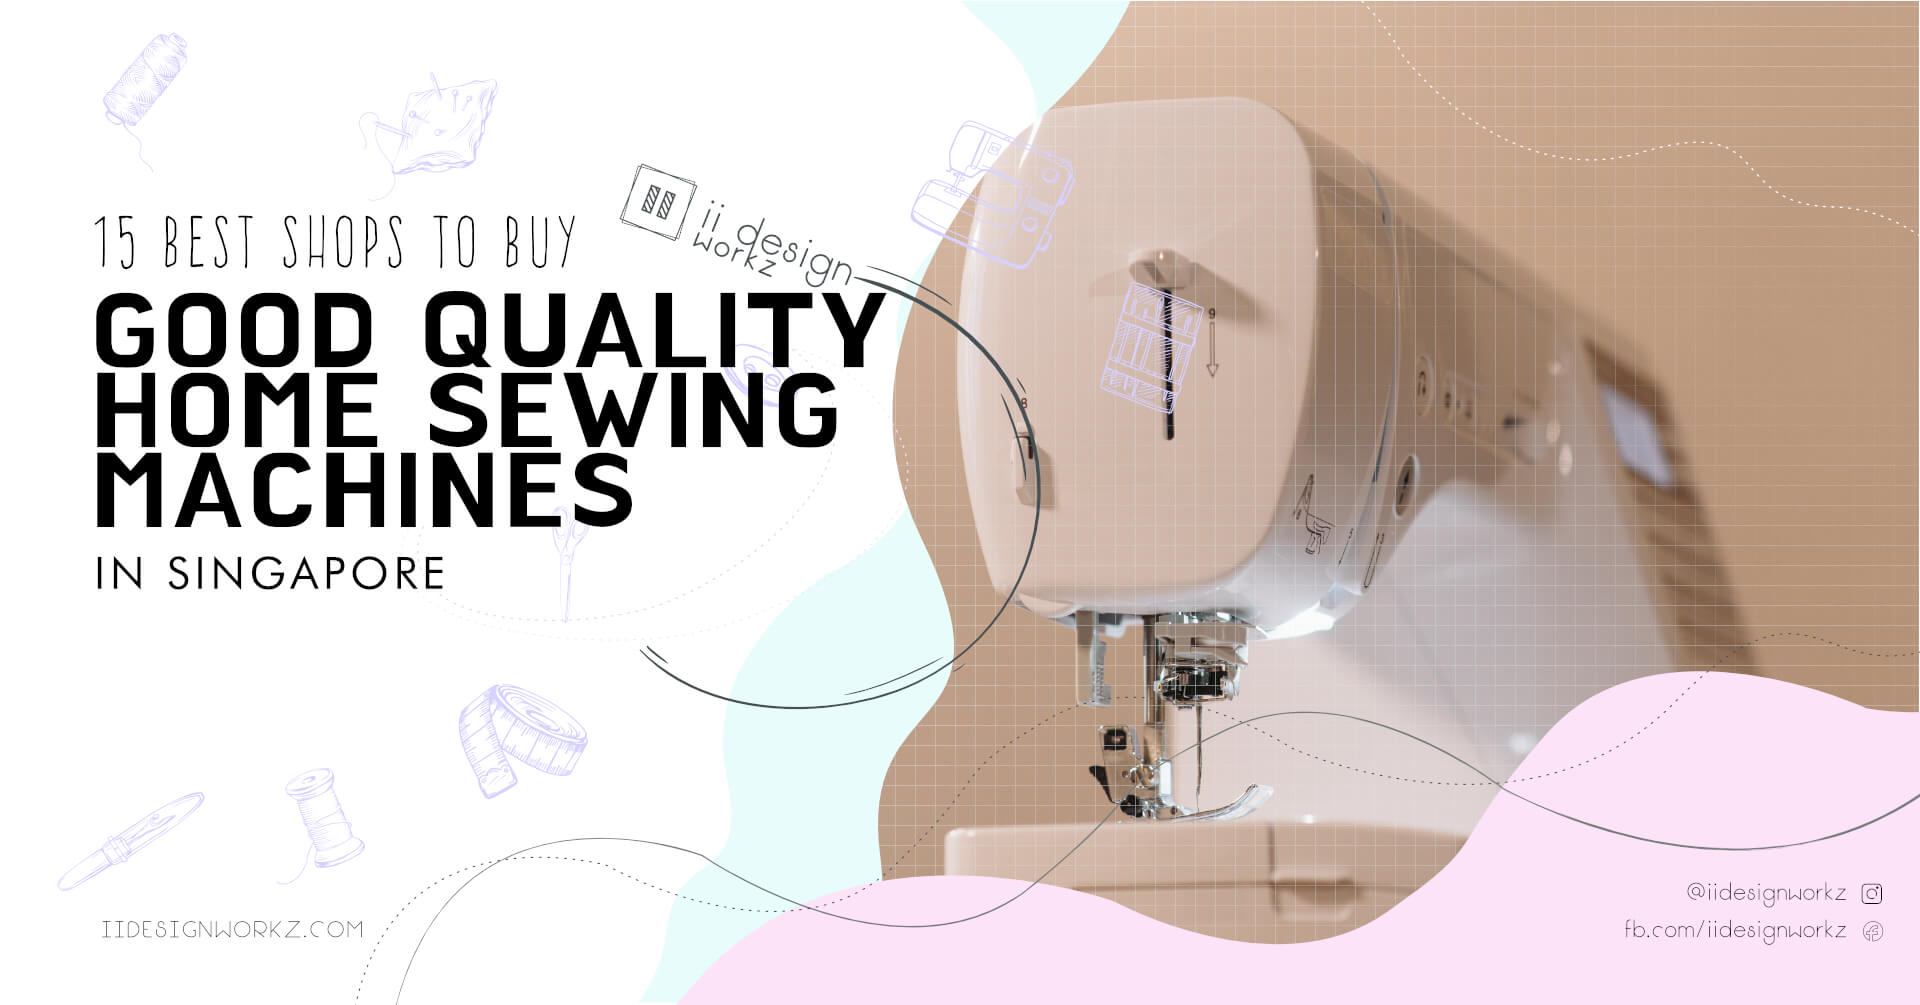 Blog Article: 15 Best Shops To Buy Good Quality Home Sewing Machines in Singapore「 ii Design Workz 」